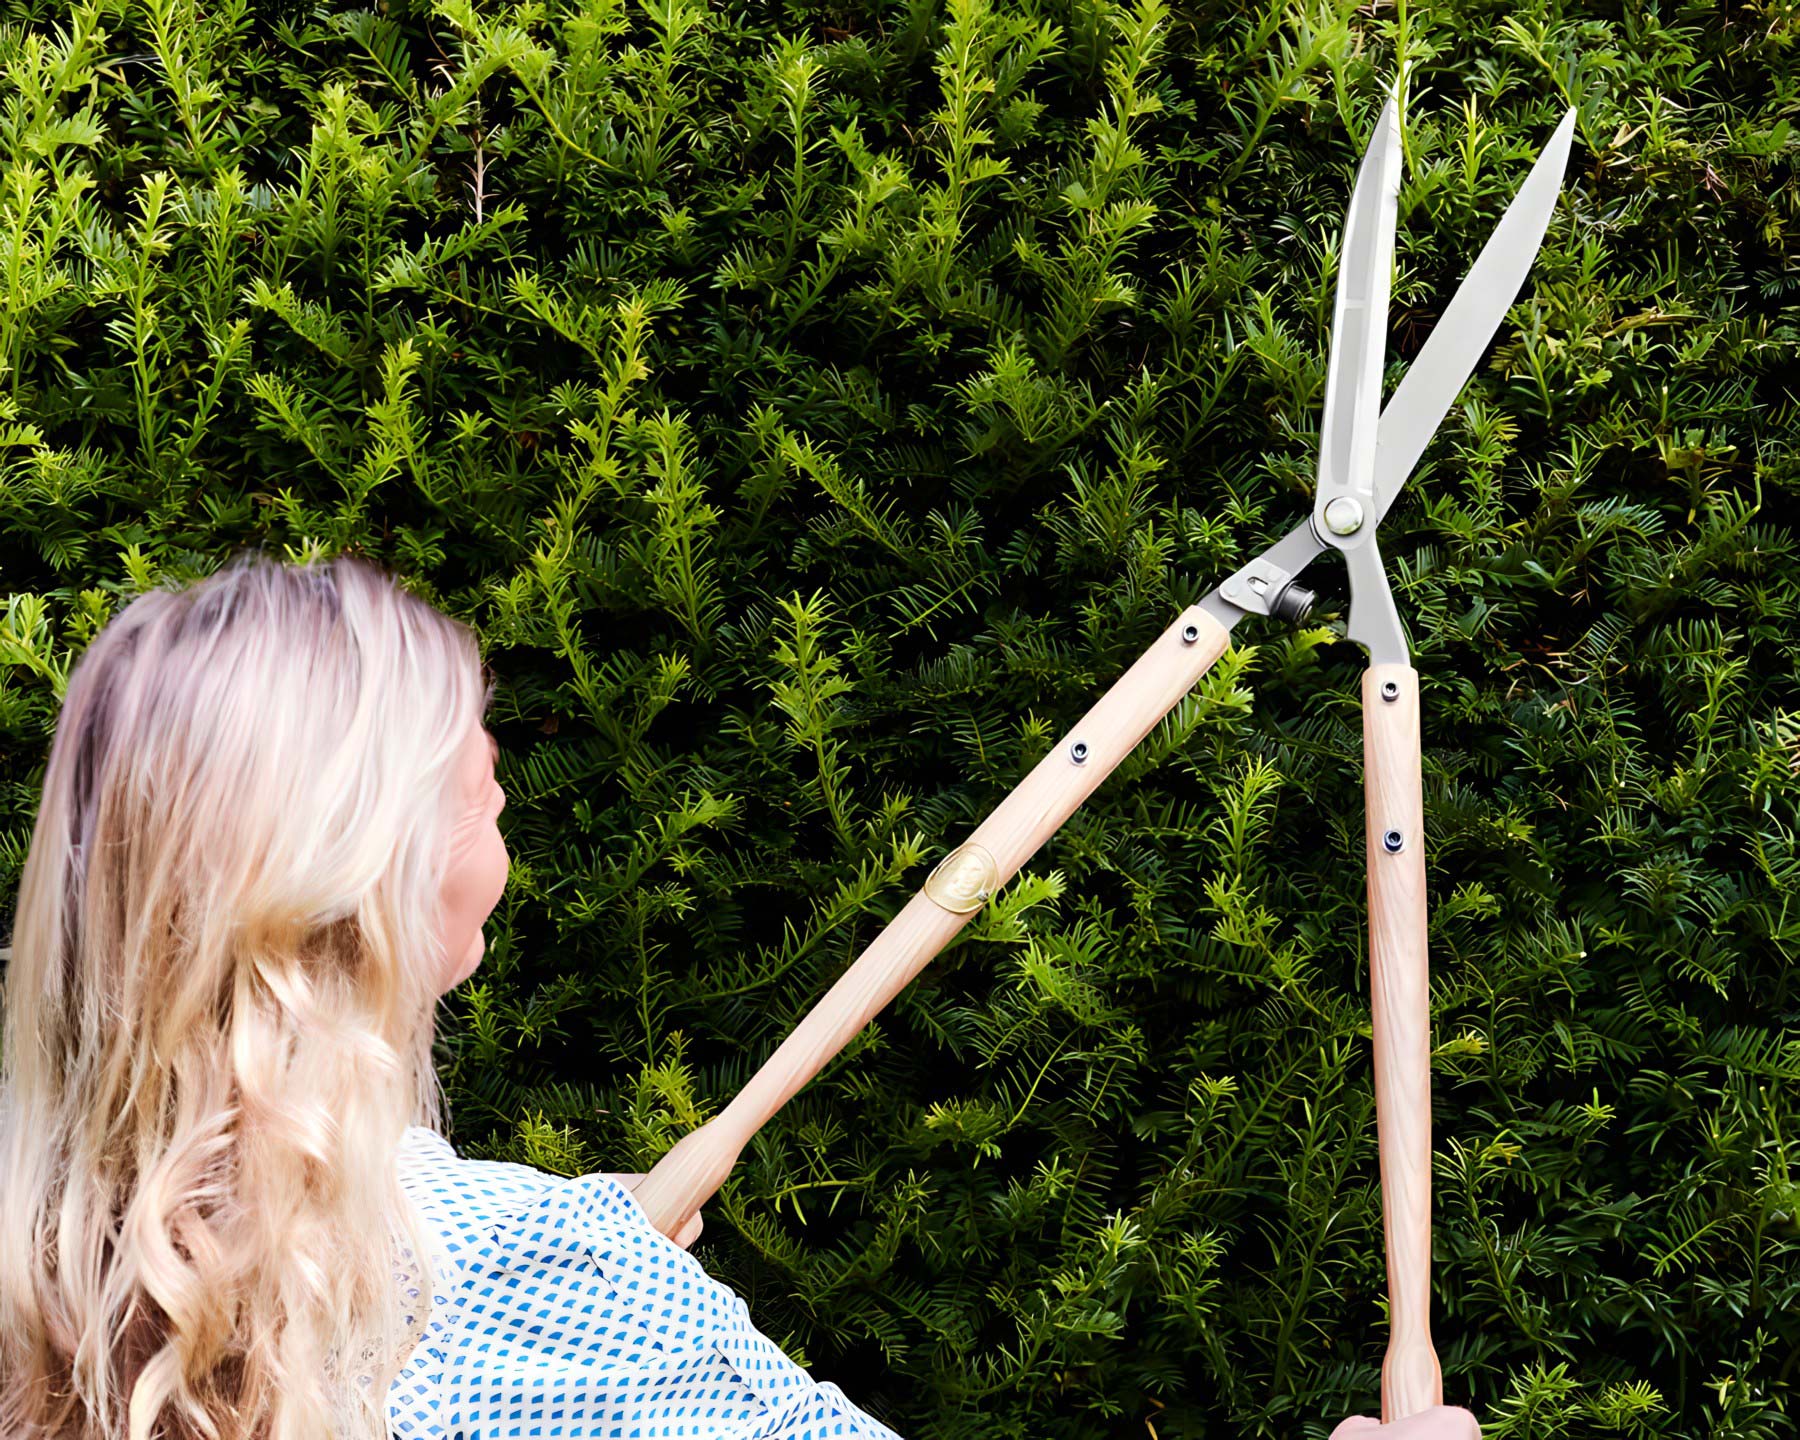 - part of new range of quality garden tools by Sophie Conran